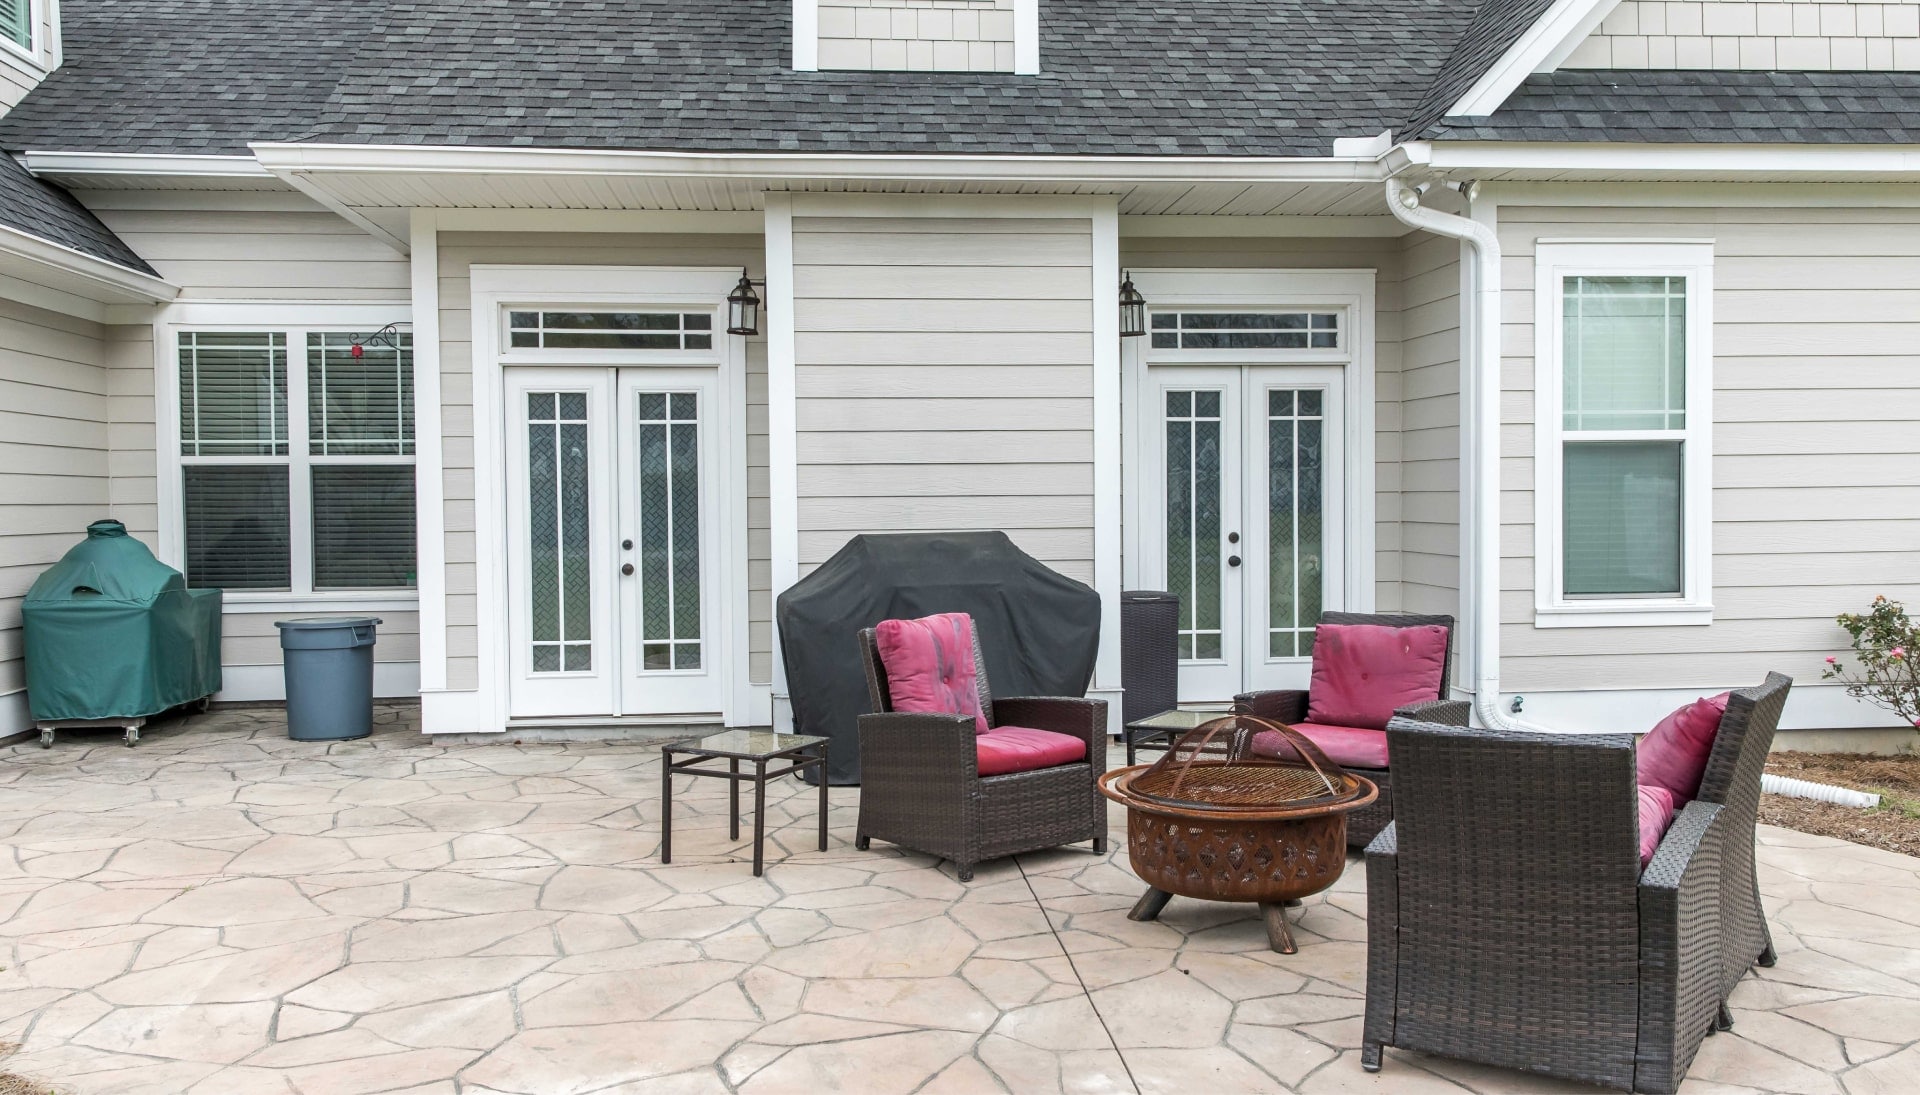 Elevate Your Outdoor Living Space with Stunning Stamped Concrete Patio in Racine, WI - Choose from a Variety of Creative Patterns and Colors to Achieve a Unique and Eye-Catching Look for Your Patio with Long-Lasting Durability and Low-Maintenance.